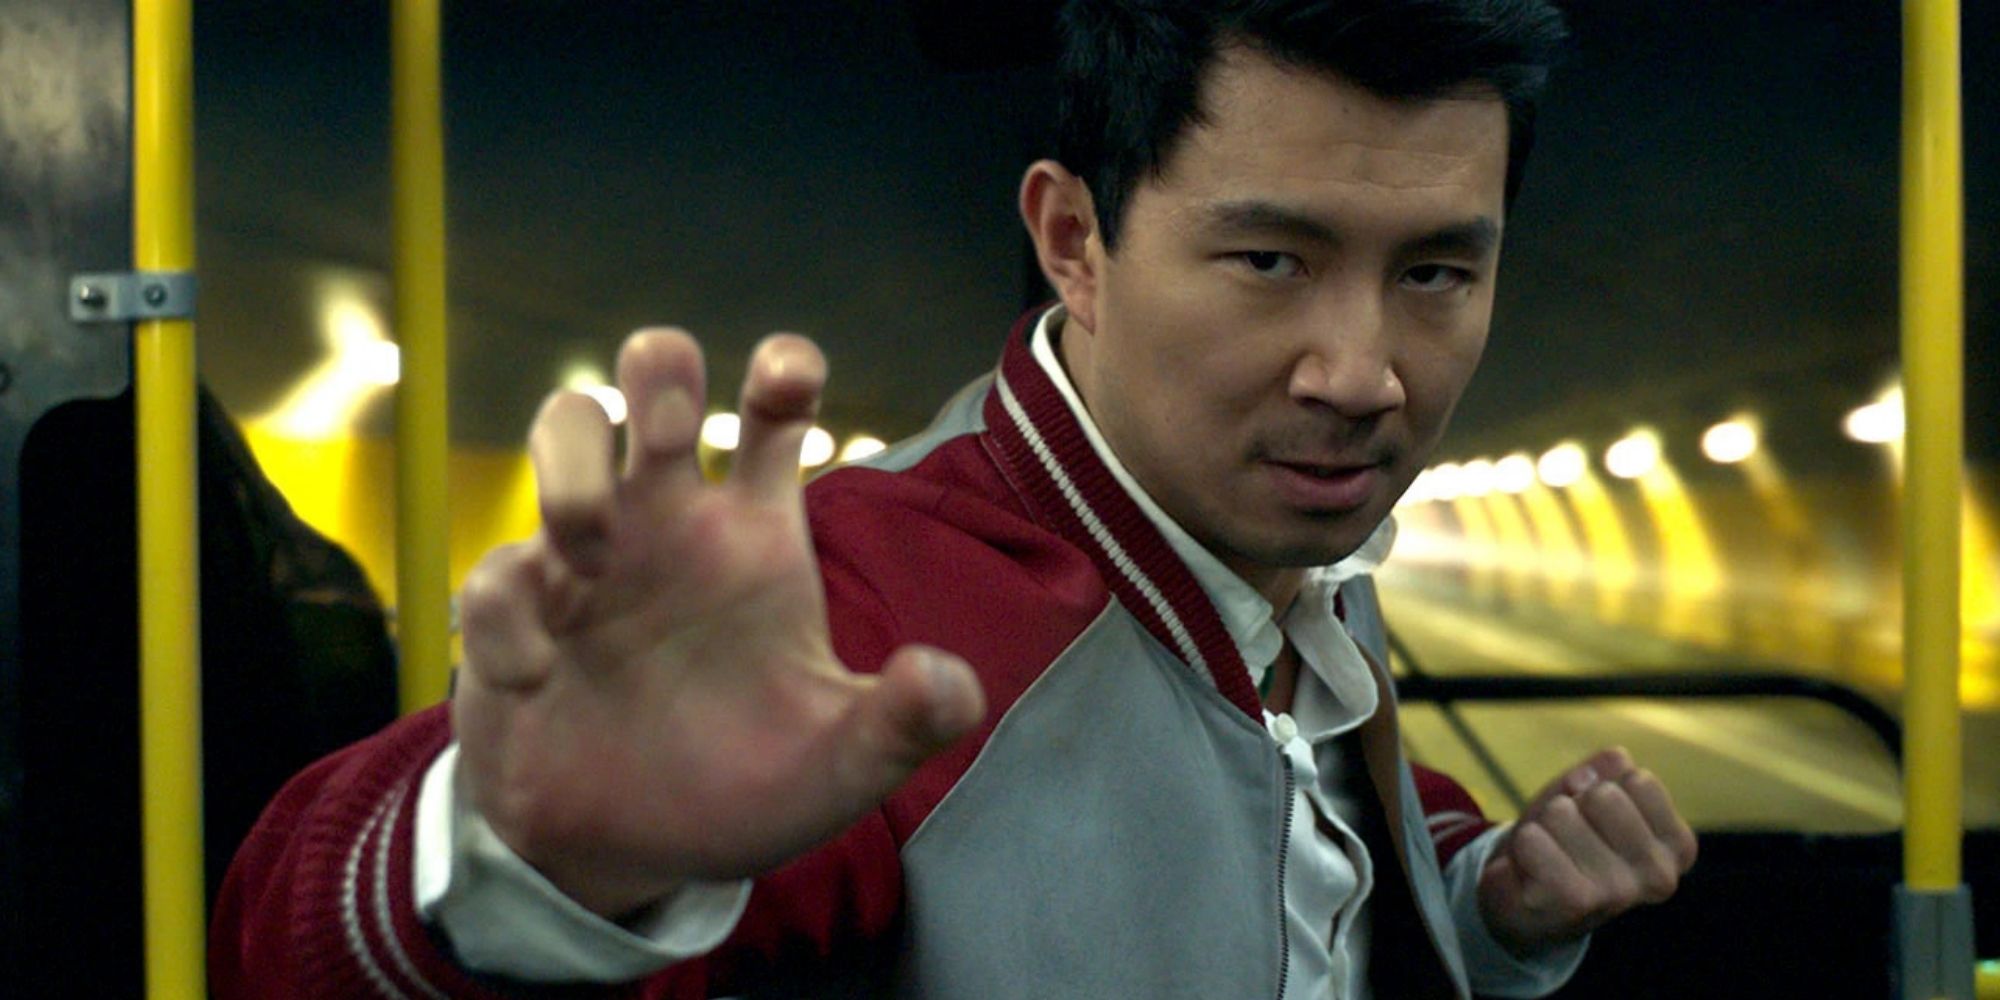 Simu Liu in 'Shang-Chi and the Legend of the Ten Rings' (2021)